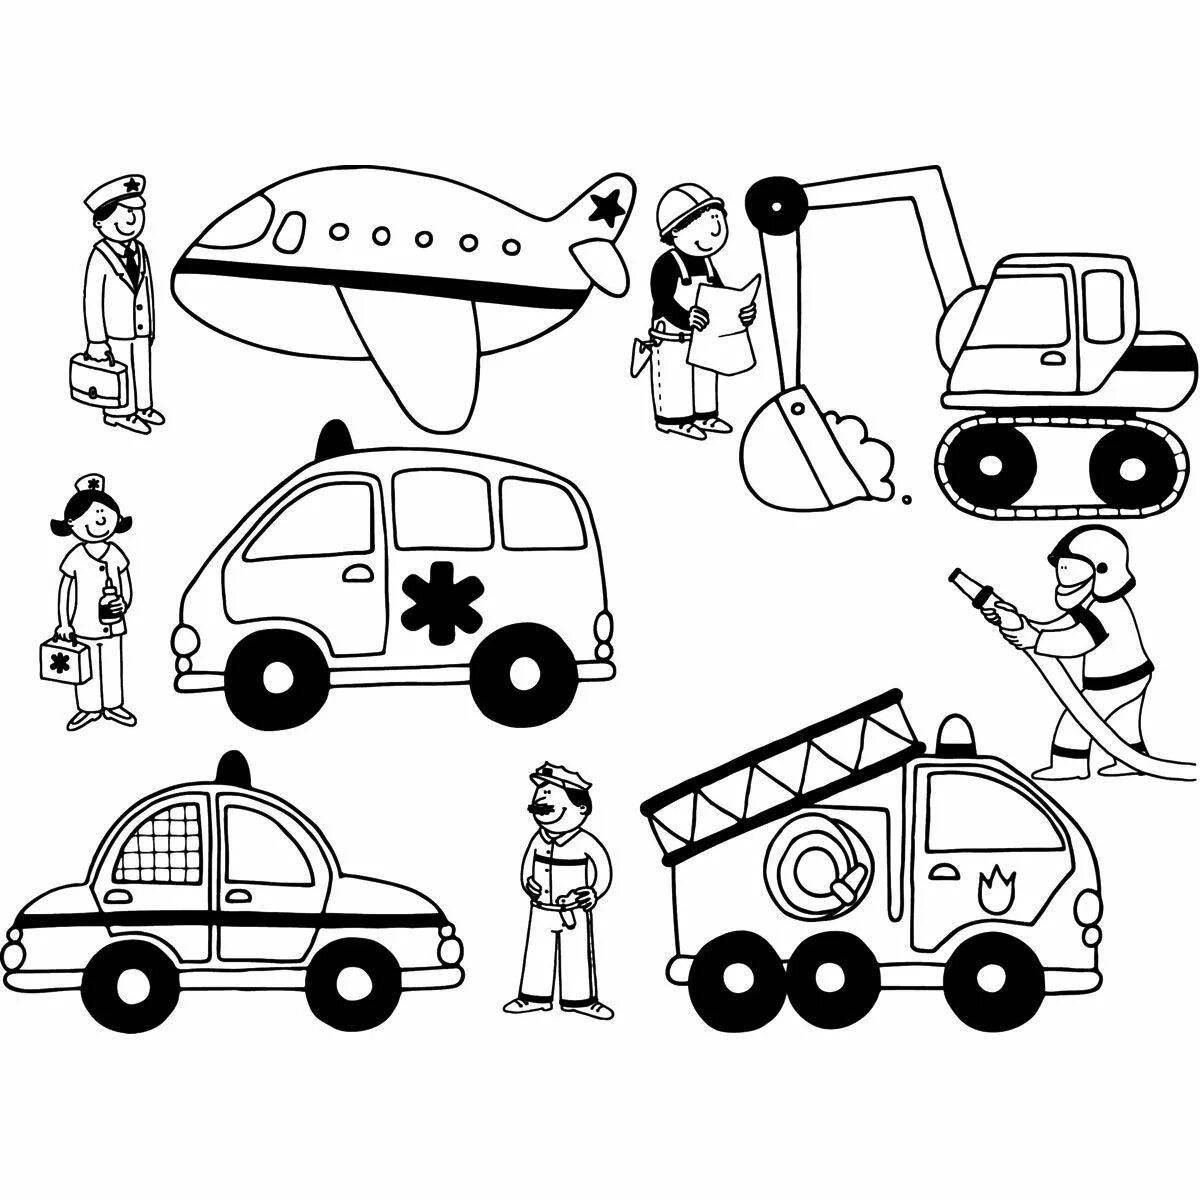 Amazing special vehicle coloring pages for 6-7 year olds